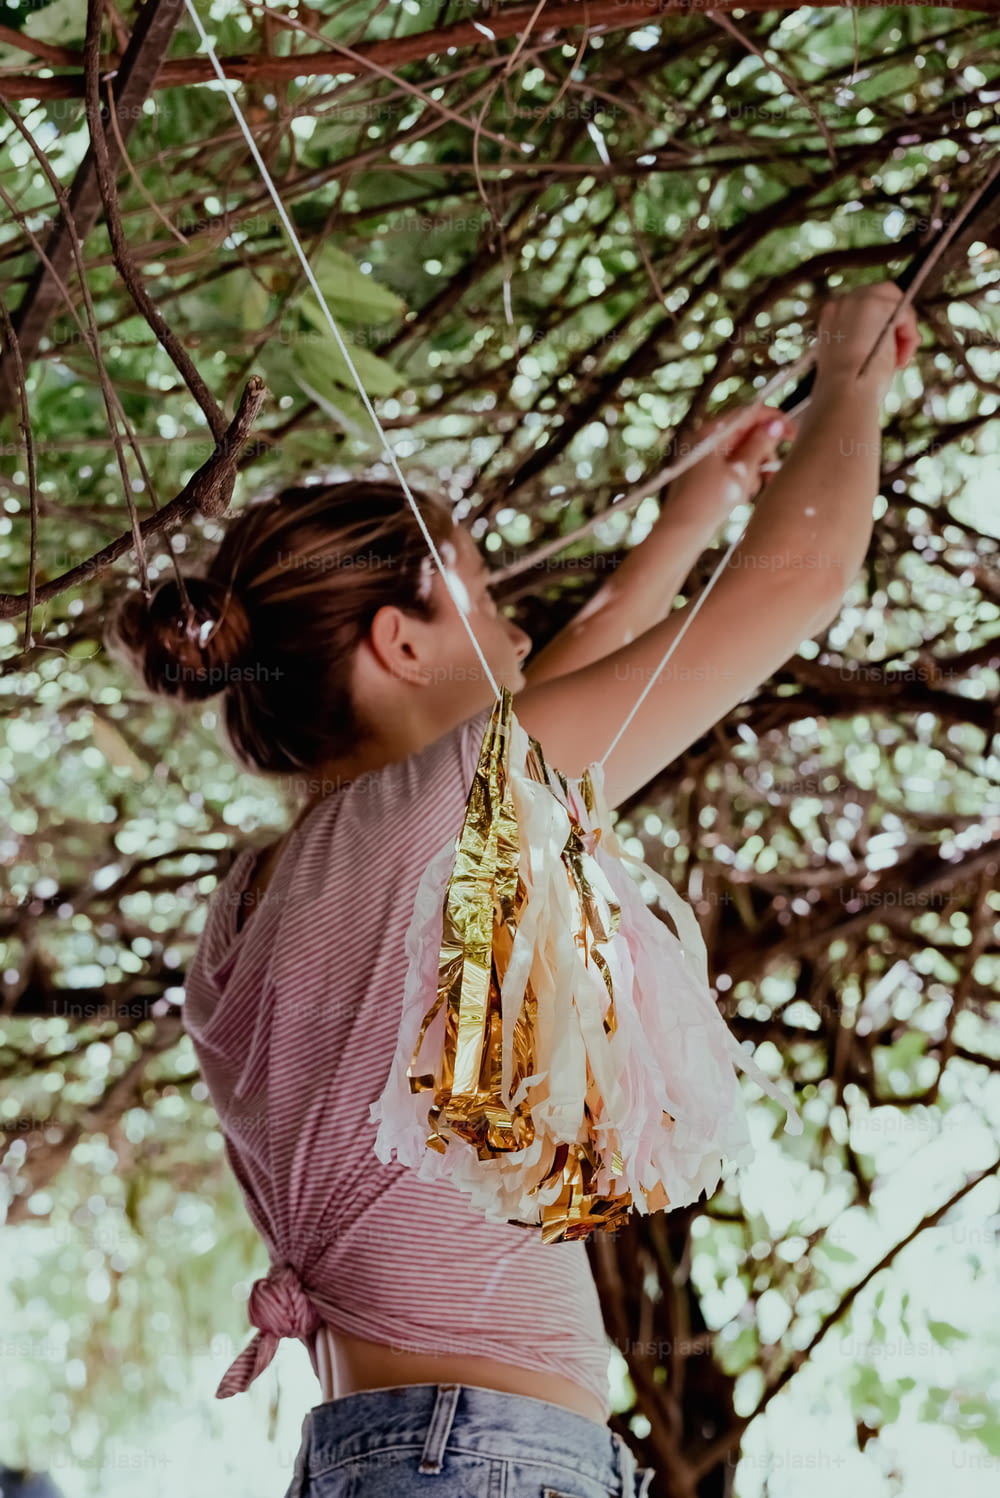 a woman in a pink shirt is hanging from a tree